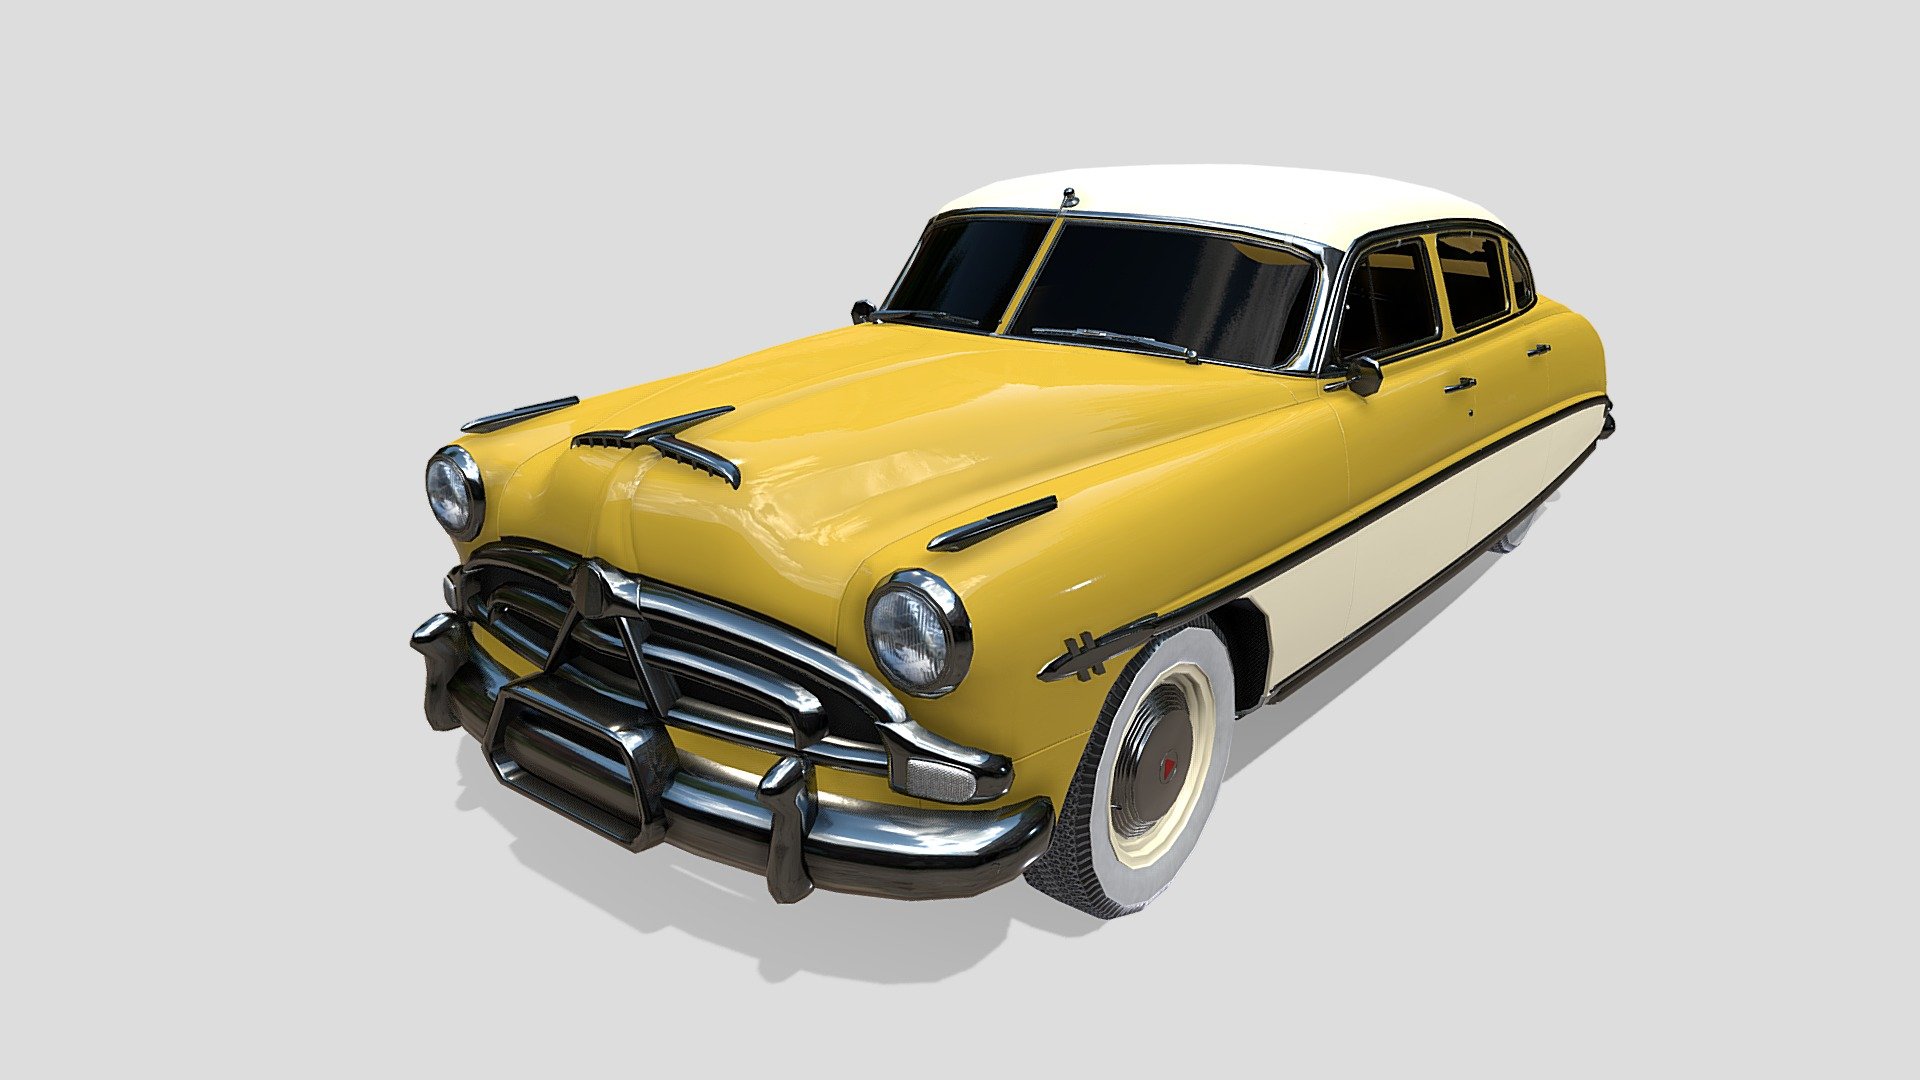 4 Door Generic 50s Sedan detailed 3d model, rendered with Cycles in Blender, using PBR textures, as per seen on attached images. 
The 3d model is scaled to original size in Blender.

File formats:
-.blend, rendered with cycles, as seen in the images;
-.obj, with materials applied;
-.dae, with materials applied;
-.fbx, with materials applied;
-.stl;

Files come named appropriately and split by file format.

3D Software:
The 3D model was originally created in Blender 3.1 and rendered with Cycles.

Materials and textures:
The models have materials applied in all formats, and are ready to import and render.
Materials are image based using PBR, the model comes with two materials, with five 4k PBR png image textures each corresponding to:
-exterior;
-wheels;

Preview scenes:
The preview images are rendered in Blender using its built-in render engine &lsquo;Cycles'.

For any problems please feel free to contact me.
Don't forget to rate and enjoy! - Generic 50s sedan - Buy Royalty Free 3D model by dragosburian 3d model